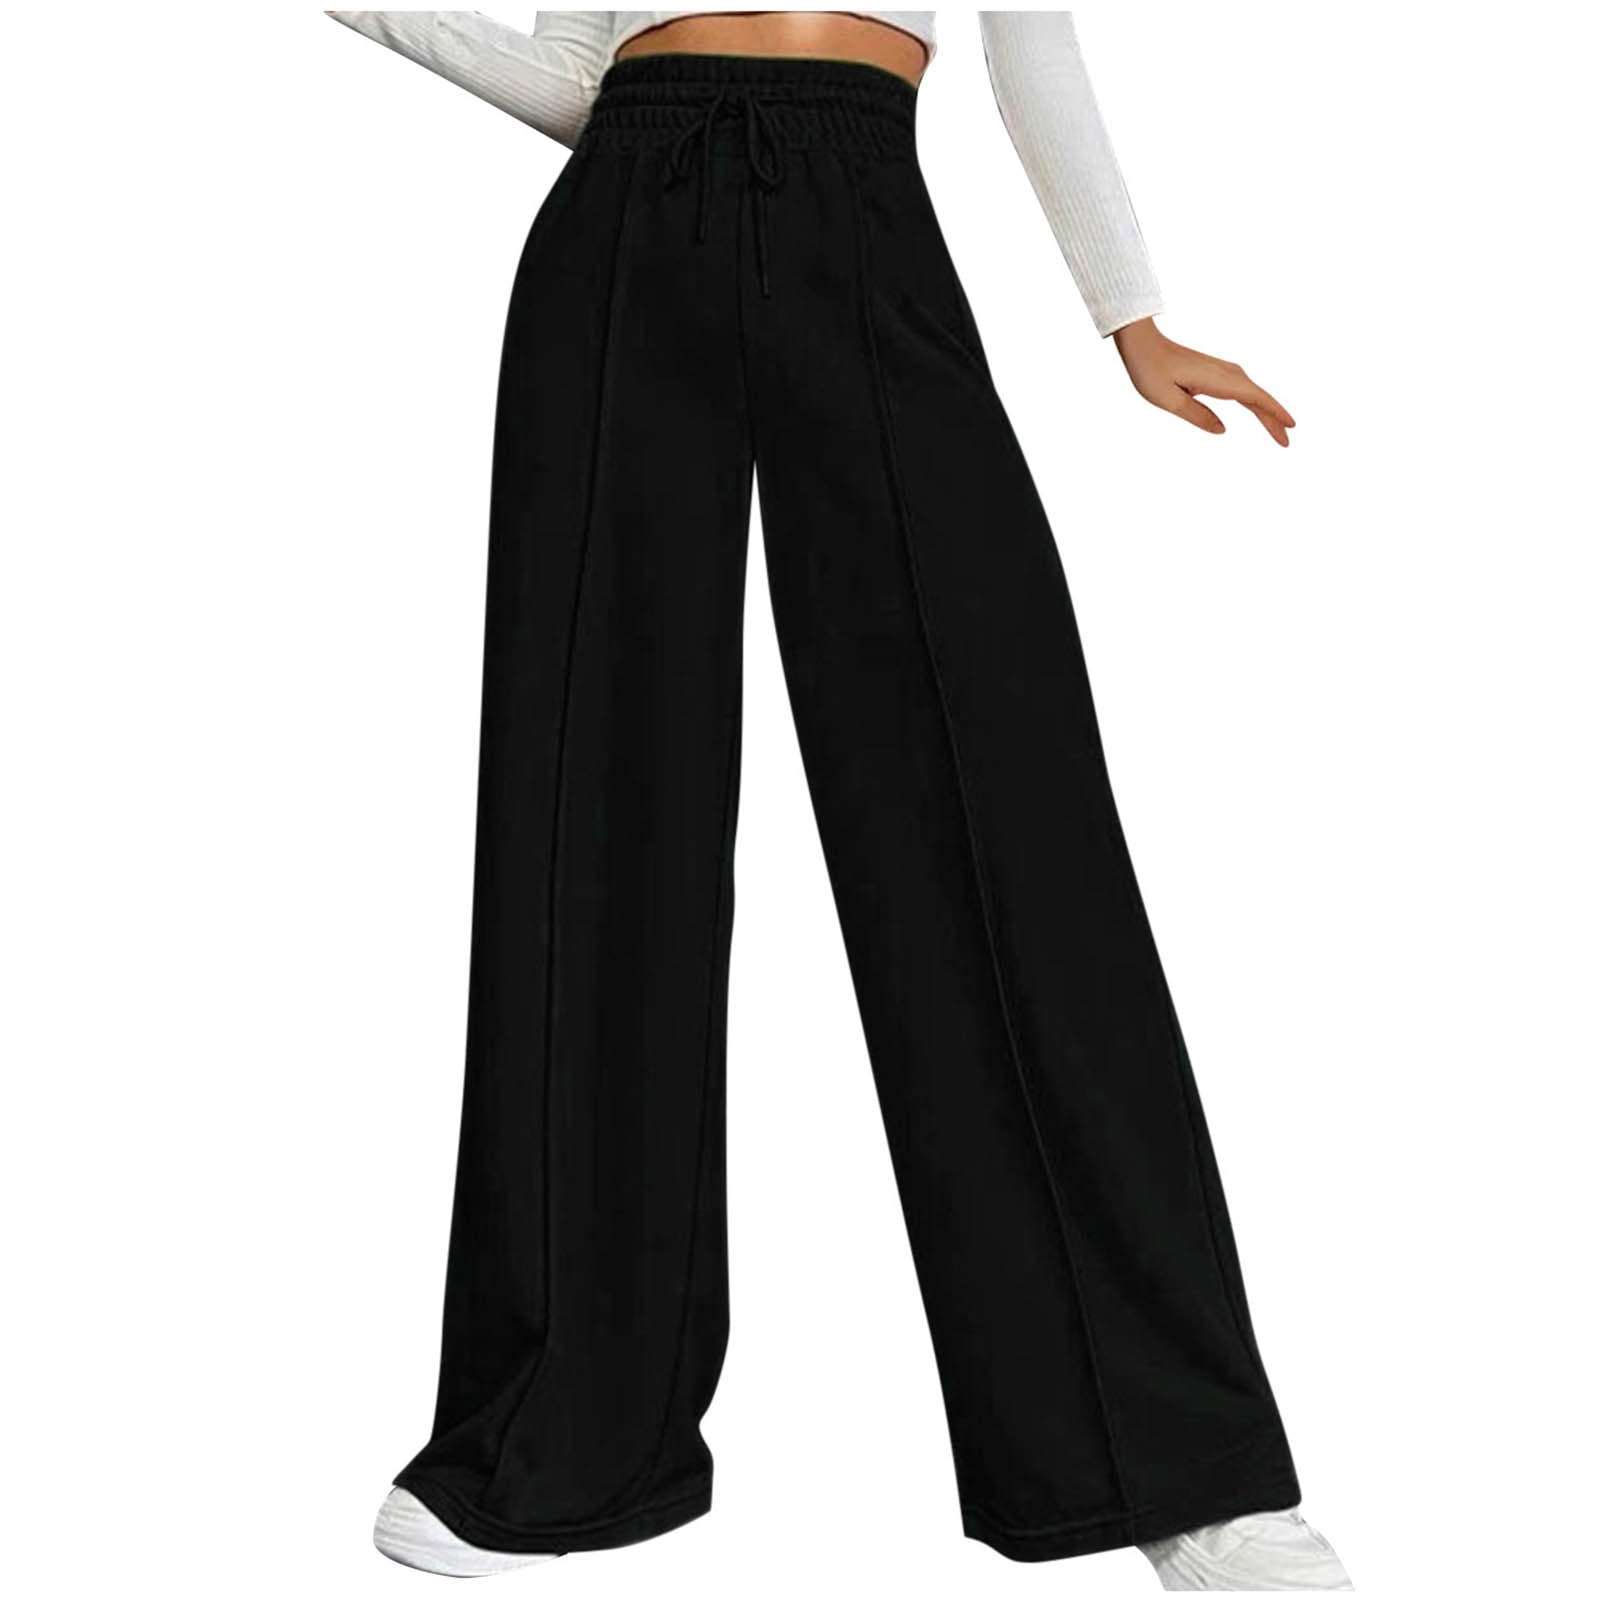 bellylady Women rousers Black High Waist Wide Leg Pants Loose Straight Leg  All-match Mopping Pants color